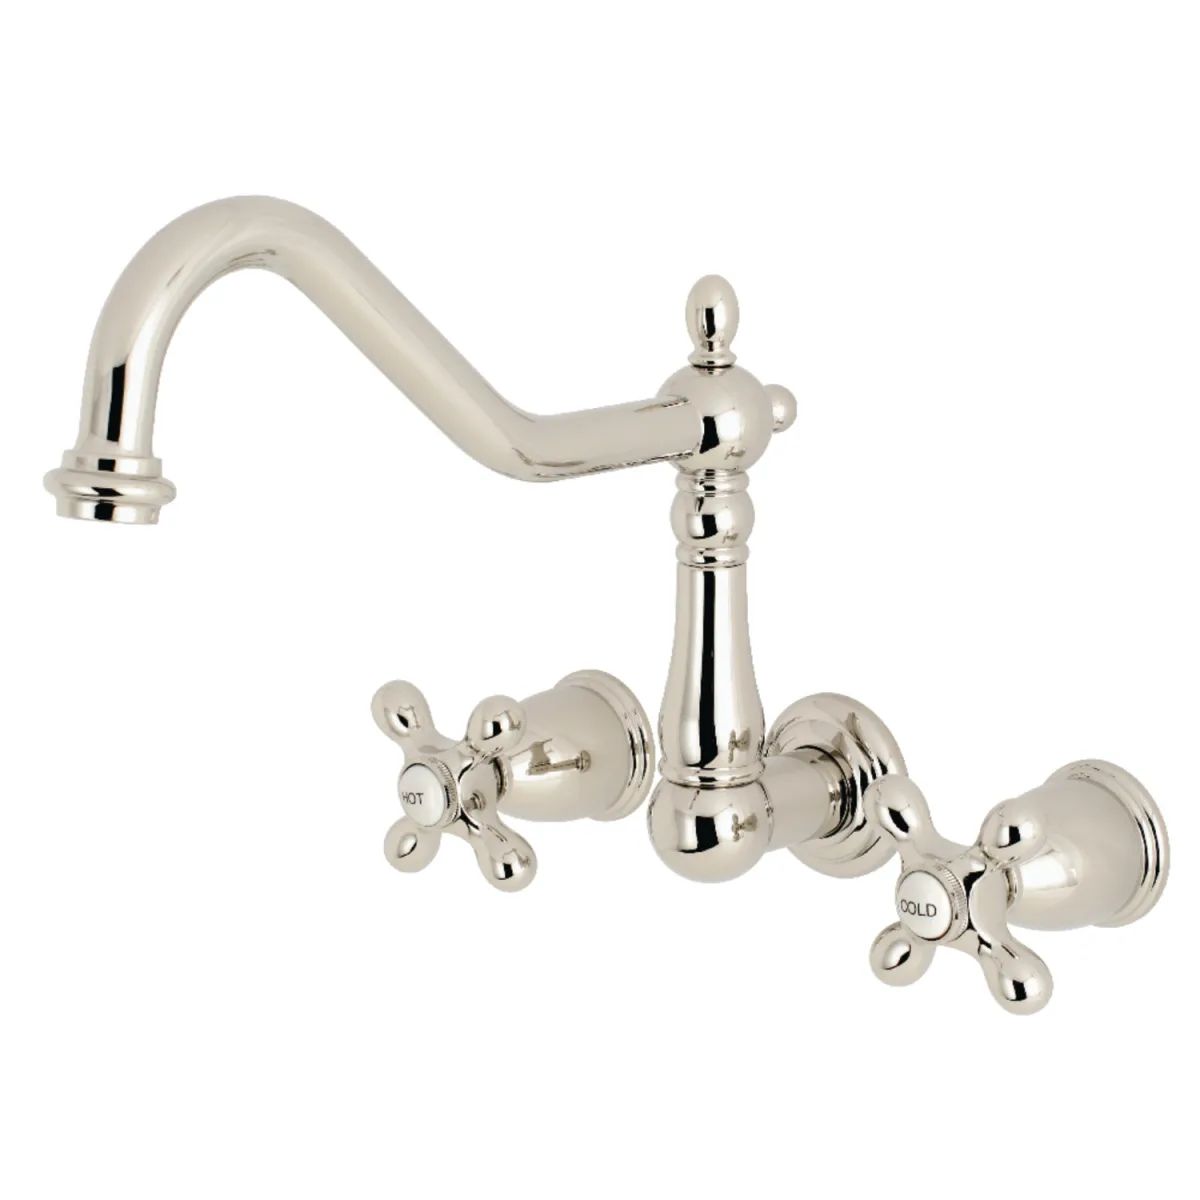 Heritage Wall Mounted Tub Filler | Build.com, Inc.